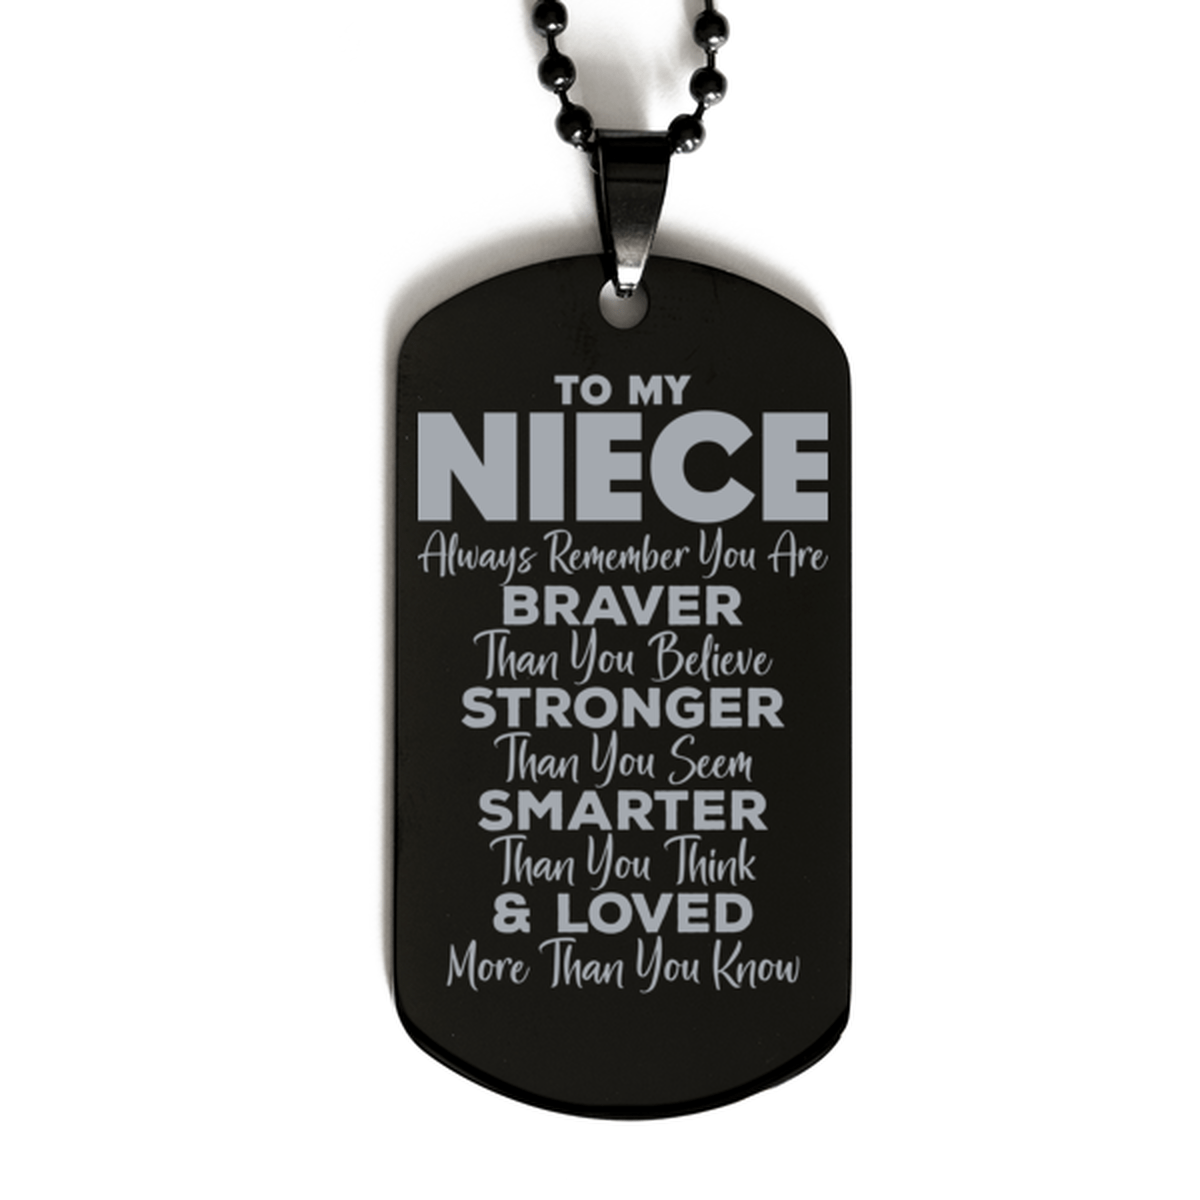 Motivational Niece Black Dog Tag Necklace, Niece Always Remember You Are Braver Than You Believe, Best Birthday Gifts for Niece